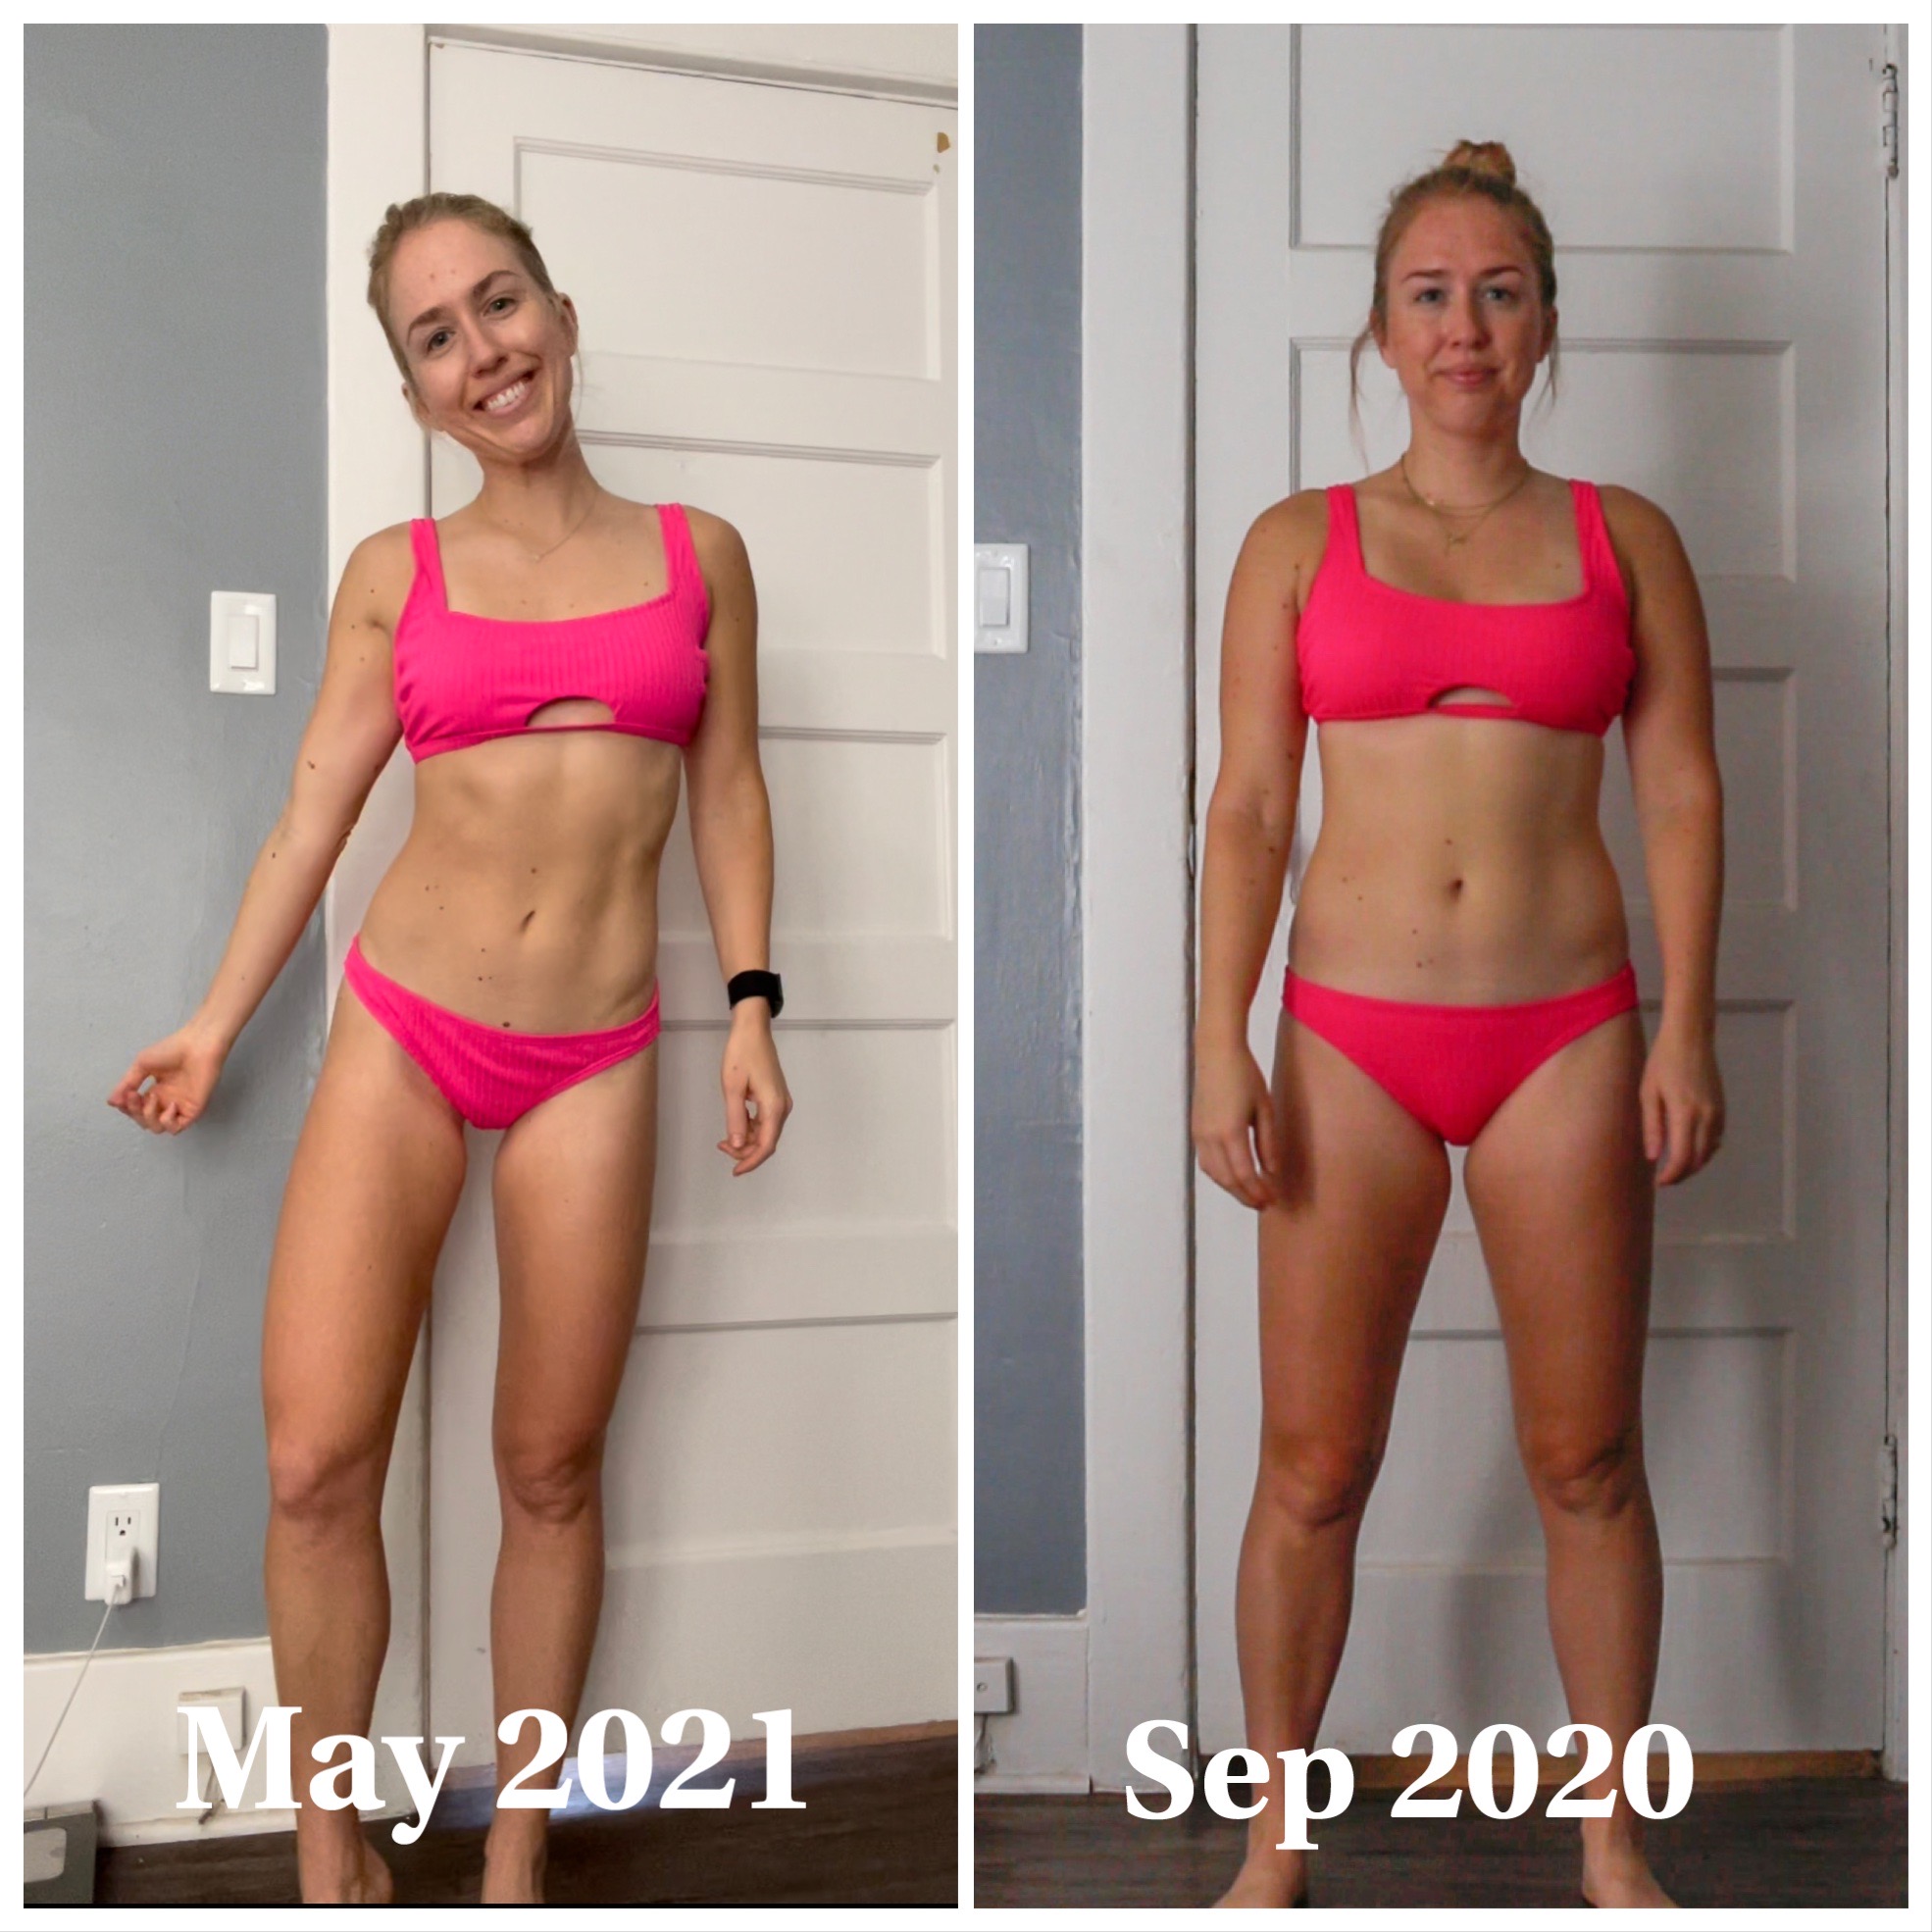 Vegan weight loss before and after